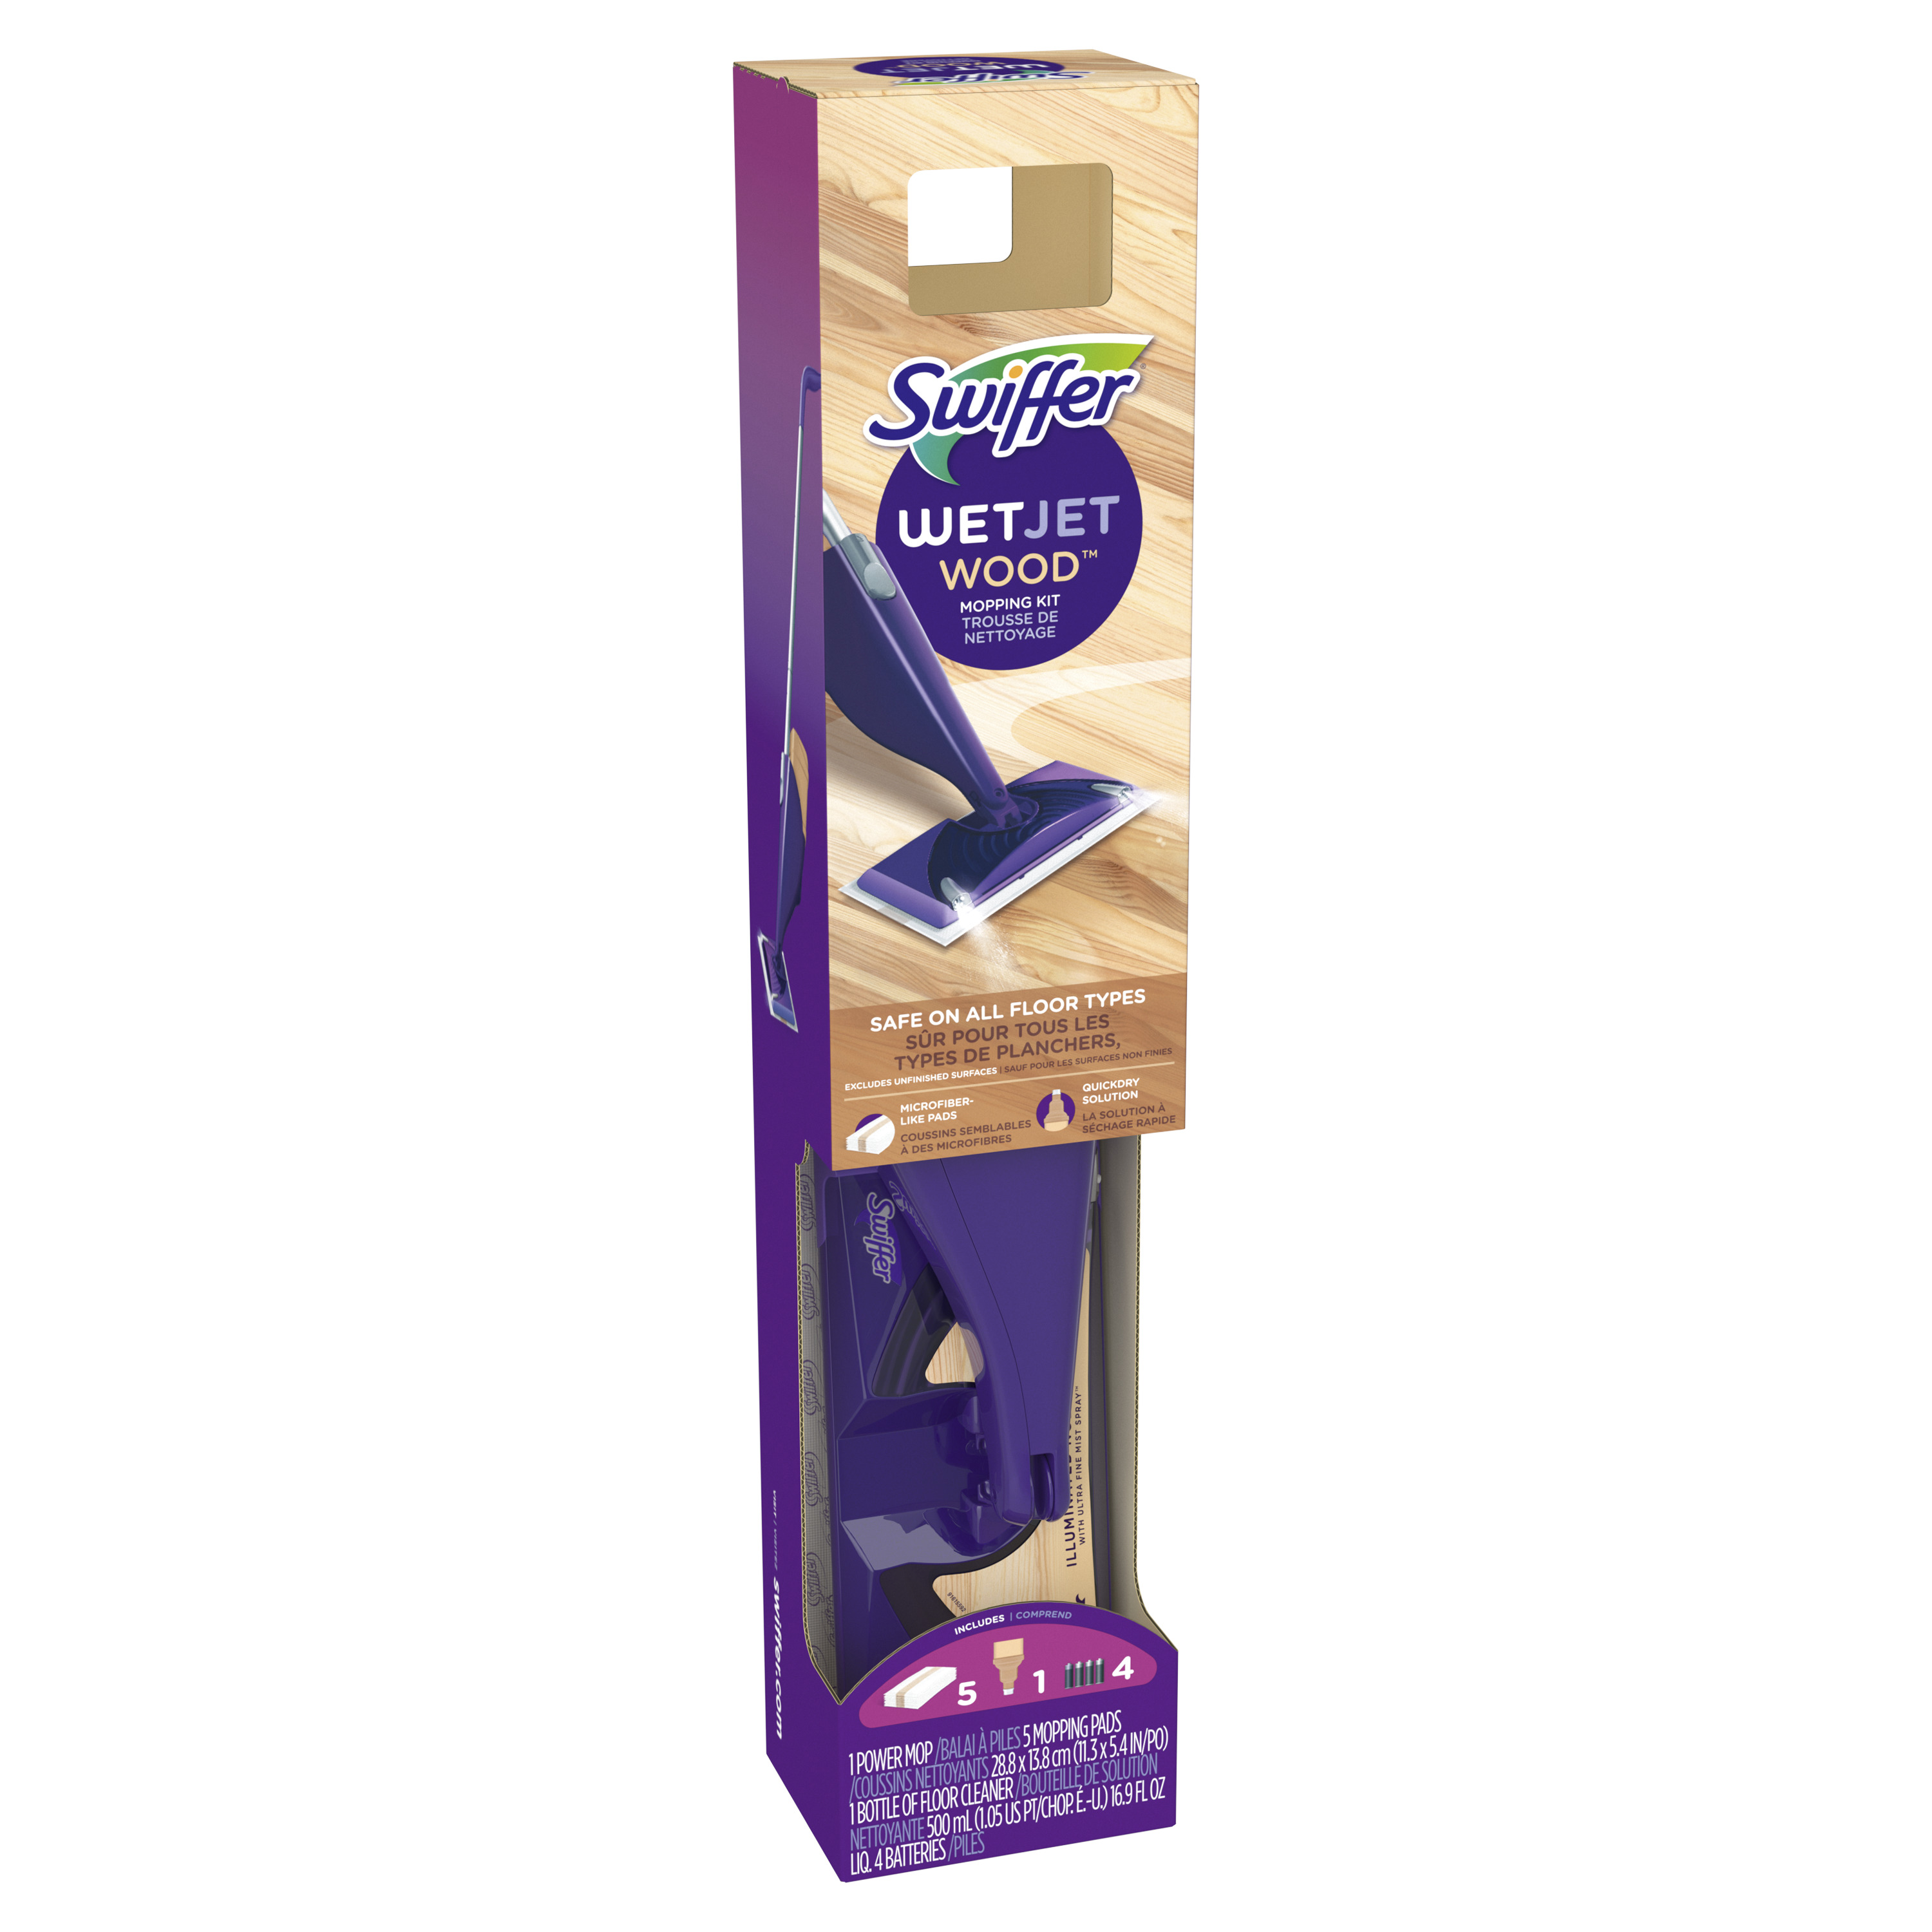 Swiffer WetJet Wood Mop Kit (1 Spray Mop, 5 Mopping Pads, 1 Cleaning Solution) - image 7 of 12